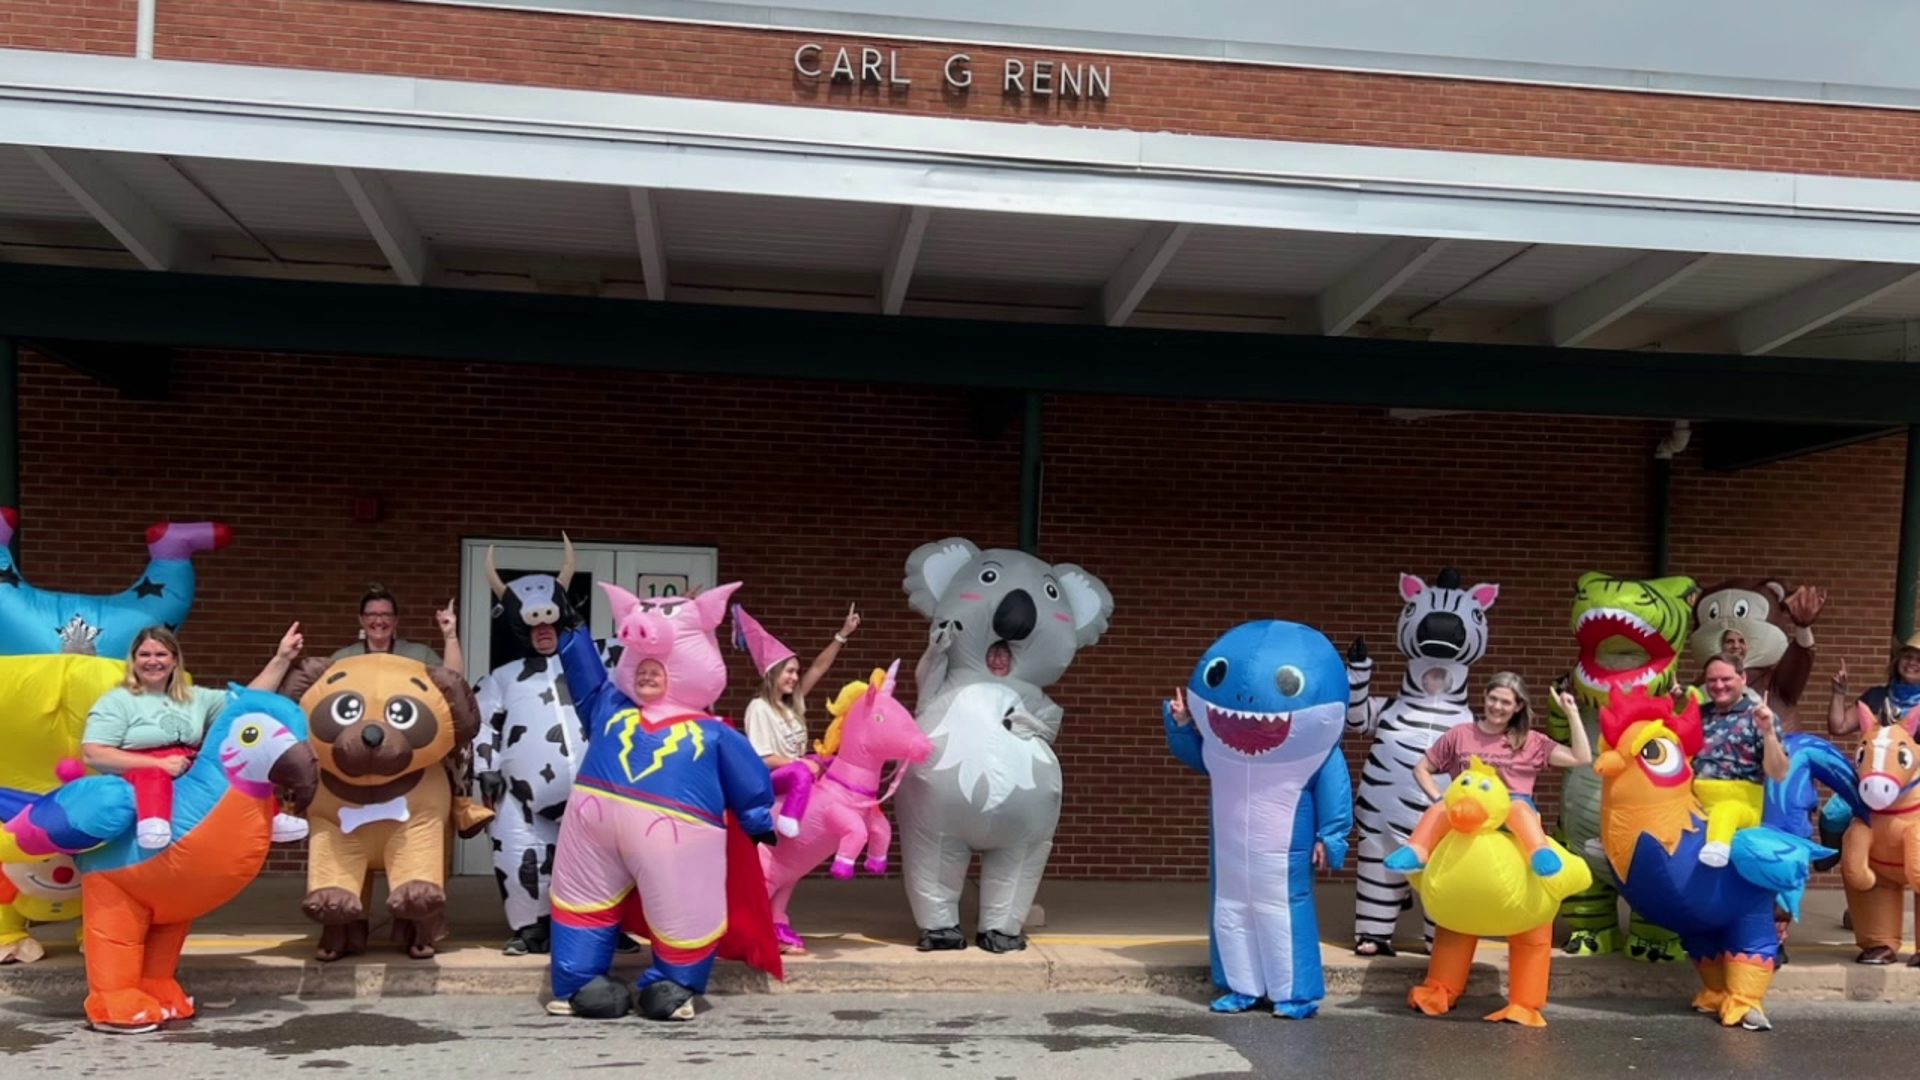 Teachers at Carl G. Renn Elementary in Lairdsville celebrated the last day of school dressed up in all kinds of inflatables.